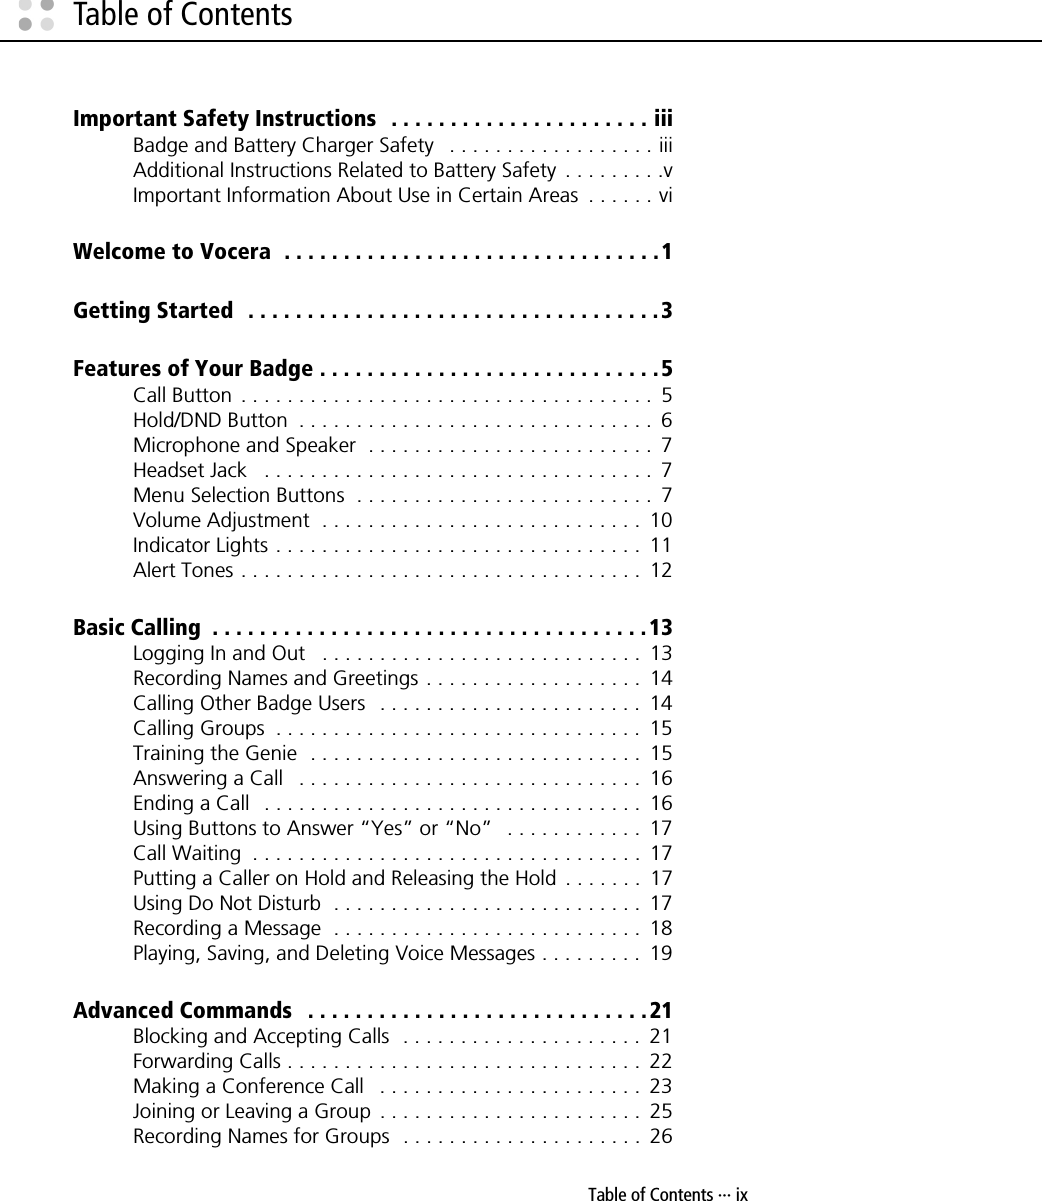 Table of Contents ··· ixTable of ContentsImportant Safety Instructions   . . . . . . . . . . . . . . . . . . . . . . iiiBadge and Battery Charger Safety   . . . . . . . . . . . . . . . . . . iiiAdditional Instructions Related to Battery Safety  . . . . . . . . .vImportant Information About Use in Certain Areas  . . . . . . viWelcome to Vocera  . . . . . . . . . . . . . . . . . . . . . . . . . . . . . . . .1Getting Started  . . . . . . . . . . . . . . . . . . . . . . . . . . . . . . . . . . .3Features of Your Badge . . . . . . . . . . . . . . . . . . . . . . . . . . . . . 5Call Button  . . . . . . . . . . . . . . . . . . . . . . . . . . . . . . . . . . . .  5Hold/DND Button  . . . . . . . . . . . . . . . . . . . . . . . . . . . . . . .  6Microphone and Speaker  . . . . . . . . . . . . . . . . . . . . . . . . .  7Headset Jack   . . . . . . . . . . . . . . . . . . . . . . . . . . . . . . . . . .  7Menu Selection Buttons  . . . . . . . . . . . . . . . . . . . . . . . . . .  7Volume Adjustment  . . . . . . . . . . . . . . . . . . . . . . . . . . . .  10Indicator Lights . . . . . . . . . . . . . . . . . . . . . . . . . . . . . . . .  11Alert Tones . . . . . . . . . . . . . . . . . . . . . . . . . . . . . . . . . . .  12Basic Calling  . . . . . . . . . . . . . . . . . . . . . . . . . . . . . . . . . . . . . 13Logging In and Out   . . . . . . . . . . . . . . . . . . . . . . . . . . . .  13Recording Names and Greetings . . . . . . . . . . . . . . . . . . .  14Calling Other Badge Users   . . . . . . . . . . . . . . . . . . . . . . .  14Calling Groups  . . . . . . . . . . . . . . . . . . . . . . . . . . . . . . . .  15Training the Genie  . . . . . . . . . . . . . . . . . . . . . . . . . . . . .  15Answering a Call   . . . . . . . . . . . . . . . . . . . . . . . . . . . . . .  16Ending a Call   . . . . . . . . . . . . . . . . . . . . . . . . . . . . . . . . .  16Using Buttons to Answer “Yes” or “No”   . . . . . . . . . . . .  17Call Waiting  . . . . . . . . . . . . . . . . . . . . . . . . . . . . . . . . . .  17Putting a Caller on Hold and Releasing the Hold  . . . . . . .  17Using Do Not Disturb  . . . . . . . . . . . . . . . . . . . . . . . . . . .  17Recording a Message  . . . . . . . . . . . . . . . . . . . . . . . . . . .  18Playing, Saving, and Deleting Voice Messages . . . . . . . . .  19Advanced Commands   . . . . . . . . . . . . . . . . . . . . . . . . . . . . .21Blocking and Accepting Calls  . . . . . . . . . . . . . . . . . . . . .  21Forwarding Calls . . . . . . . . . . . . . . . . . . . . . . . . . . . . . . .  22Making a Conference Call   . . . . . . . . . . . . . . . . . . . . . . .  23Joining or Leaving a Group  . . . . . . . . . . . . . . . . . . . . . . .  25Recording Names for Groups  . . . . . . . . . . . . . . . . . . . . .  26